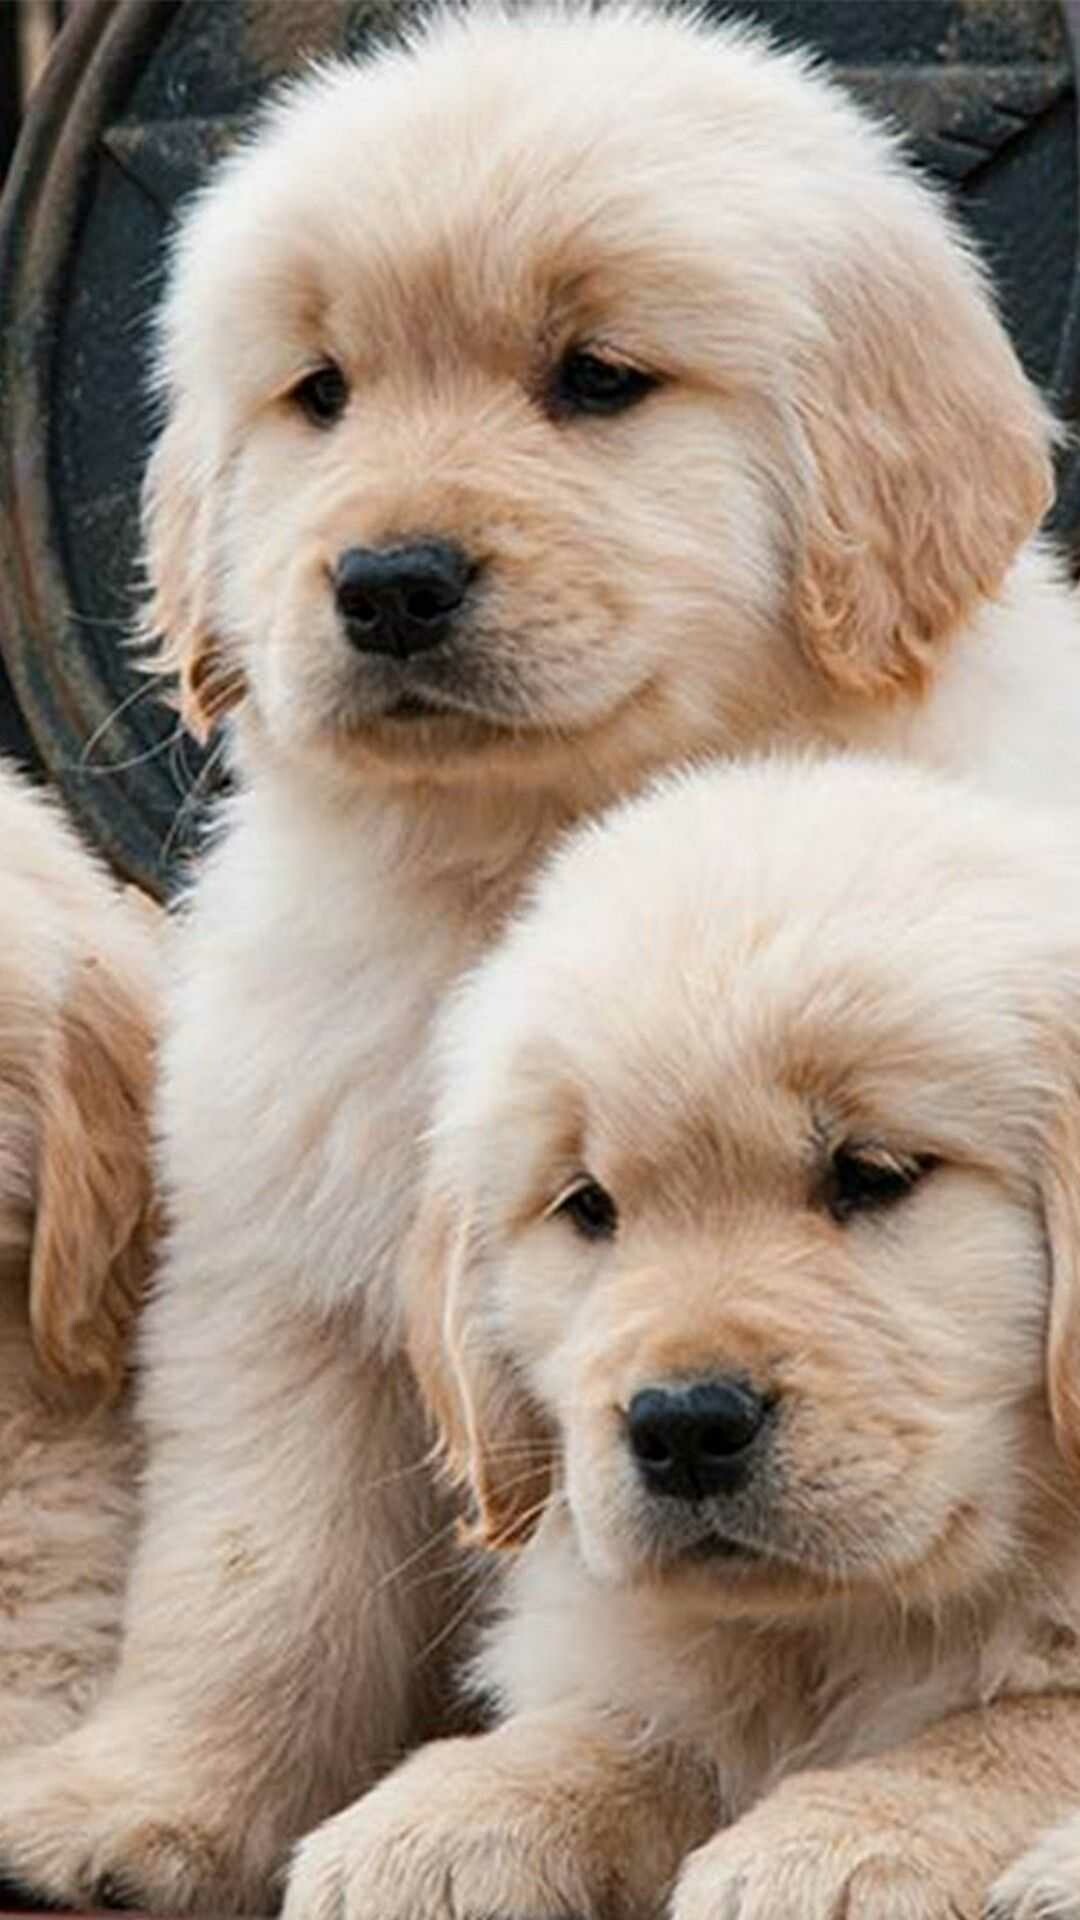 Puppy: Often called "man's best friend" because they fit in with human life. 1080x1920 Full HD Wallpaper.